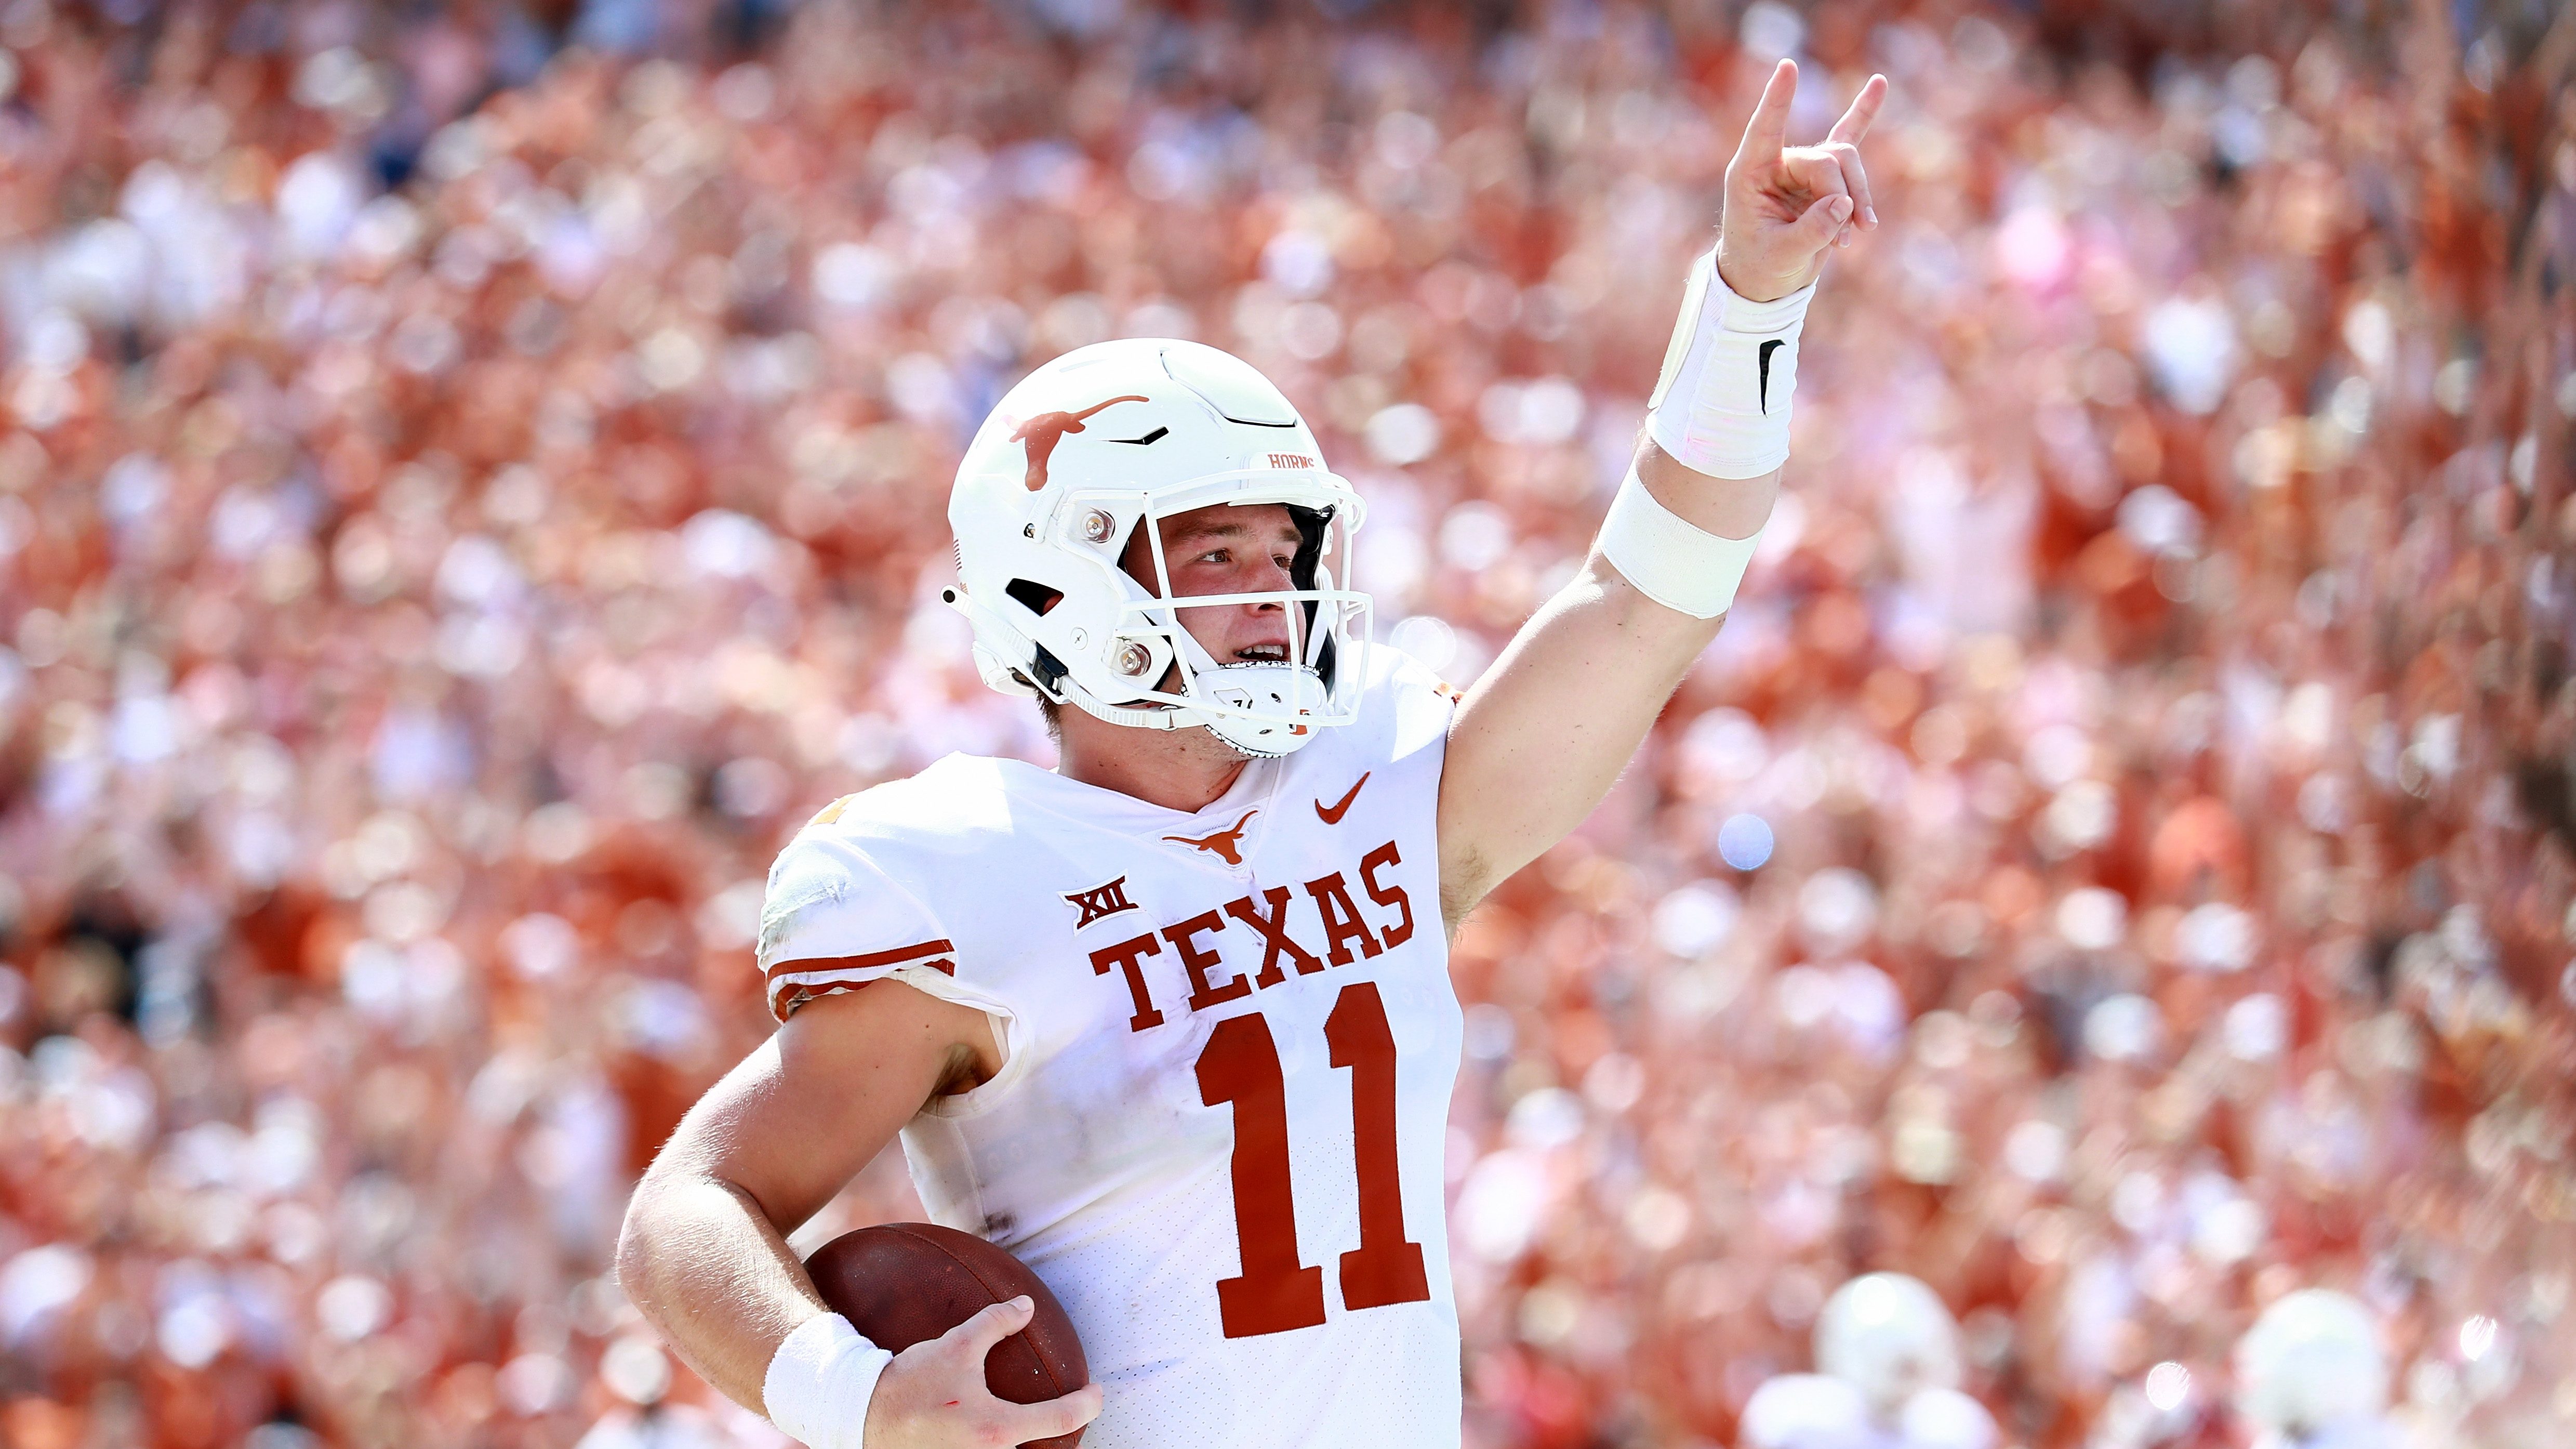 Texas vs Texas Tech Live Stream How to Watch Online Free